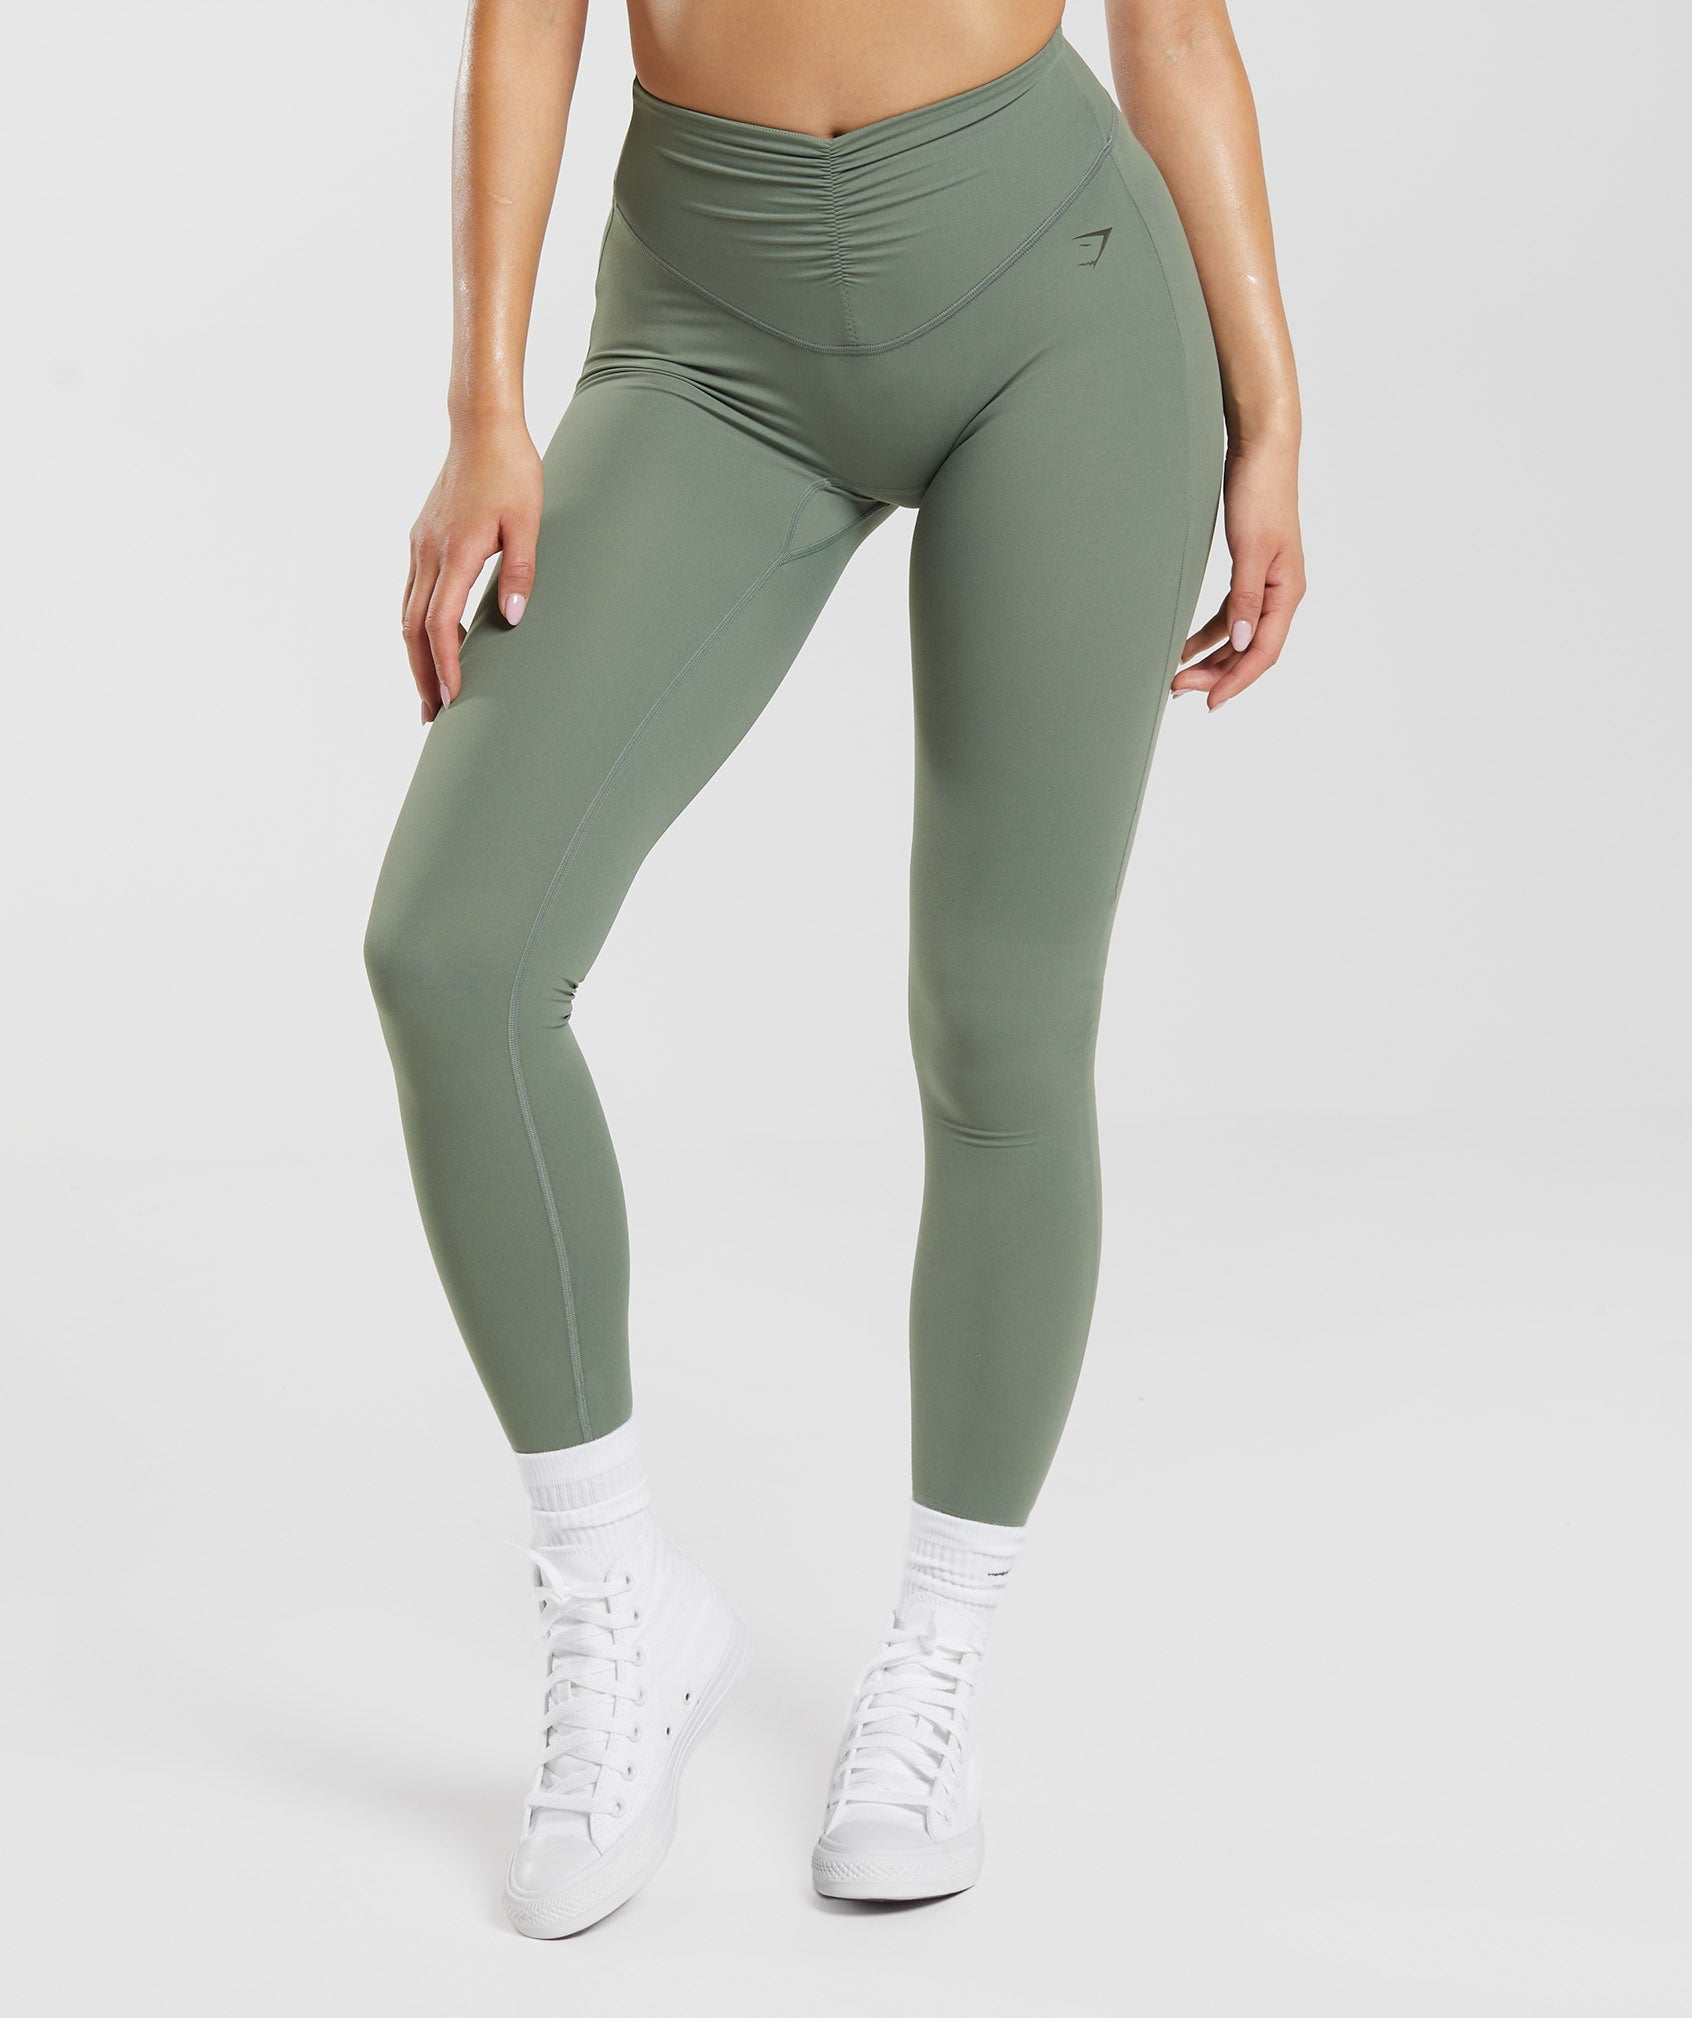 Ruched Leggings in {{variantColor} is out of stock